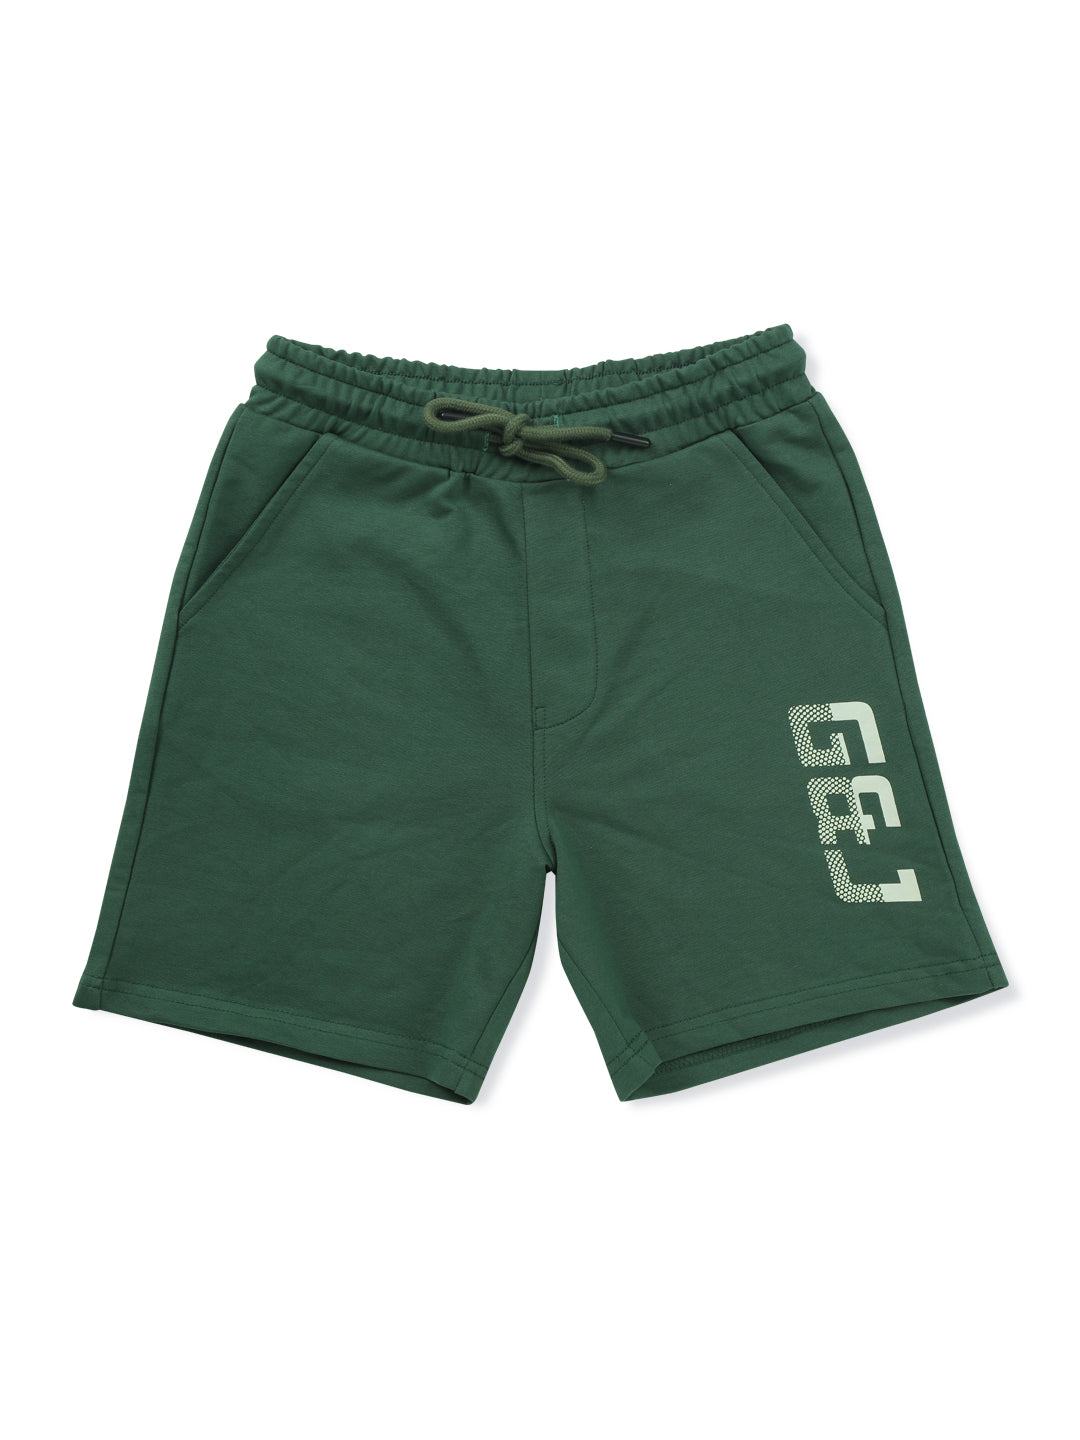 Boys Green Cotton Solid Shorts